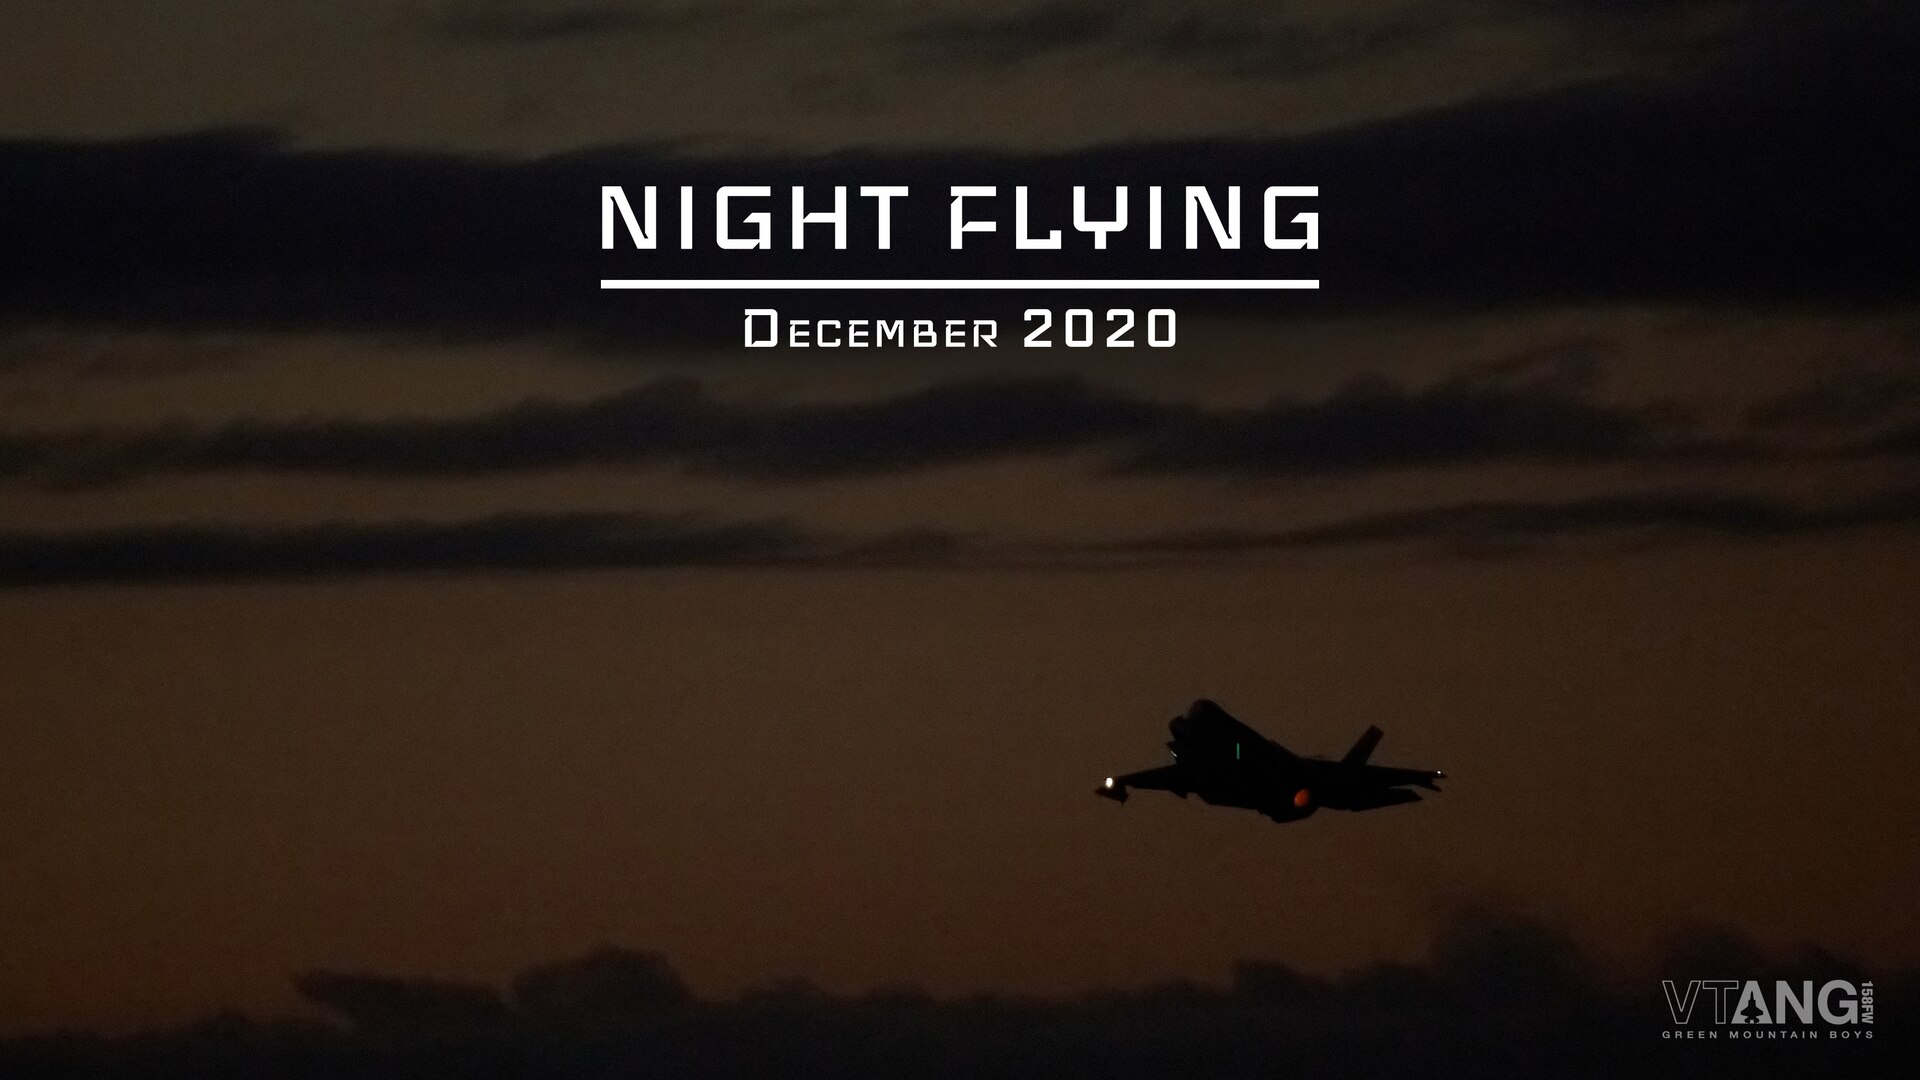 The Vermont Air National Guard is scheduled to begin two weeks of night flying operations starting Dec. 1-5 and Dec. 8-11. Nighttime takeoffs will occur between 4:30-6:30 p.m. and nighttime landings will occur between 6-8 p.m.